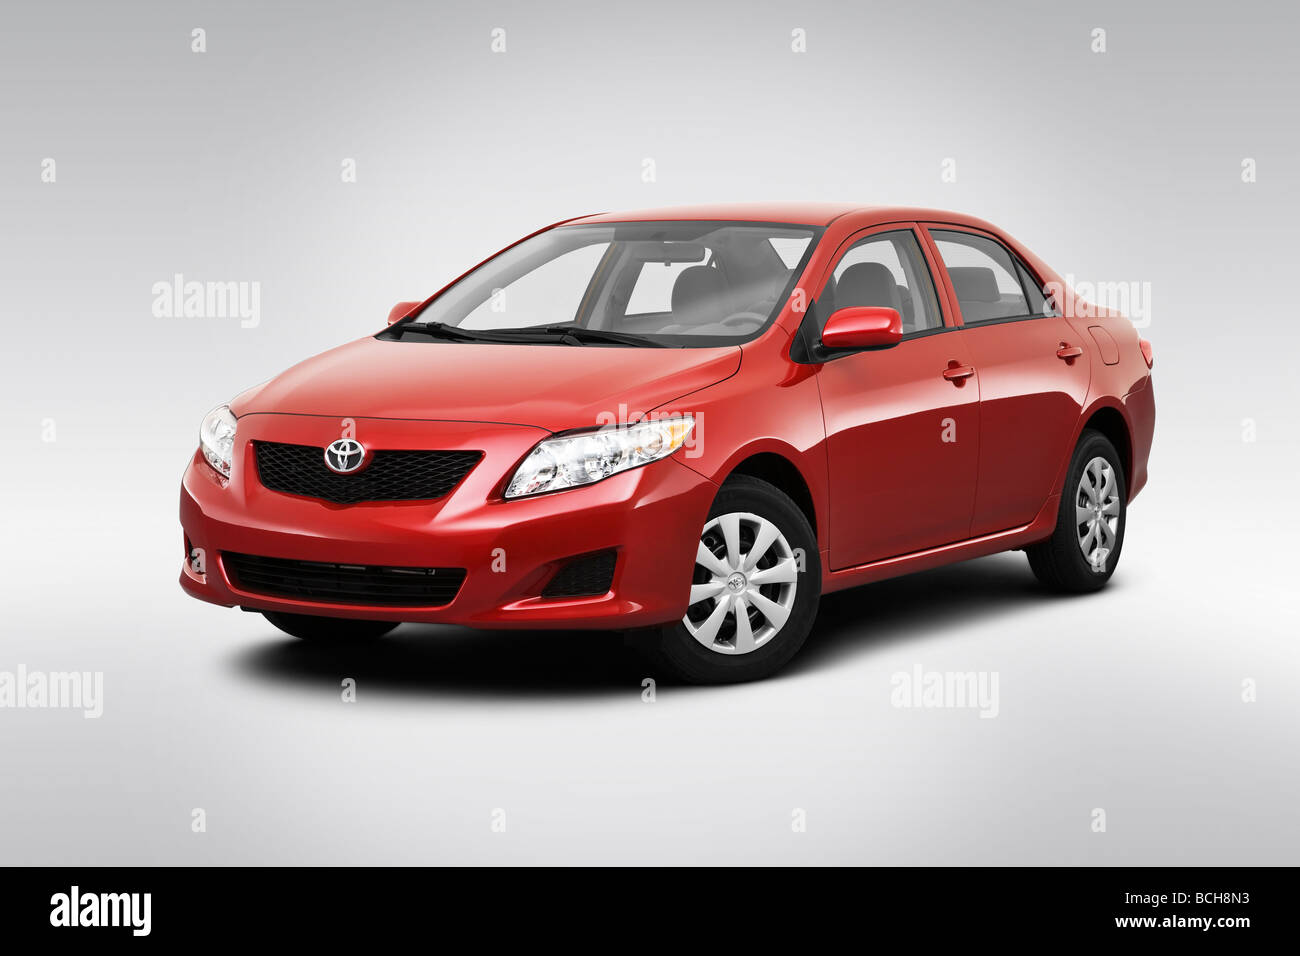 2010 Toyota Corolla Le In Red Front Angle View Stock Photo